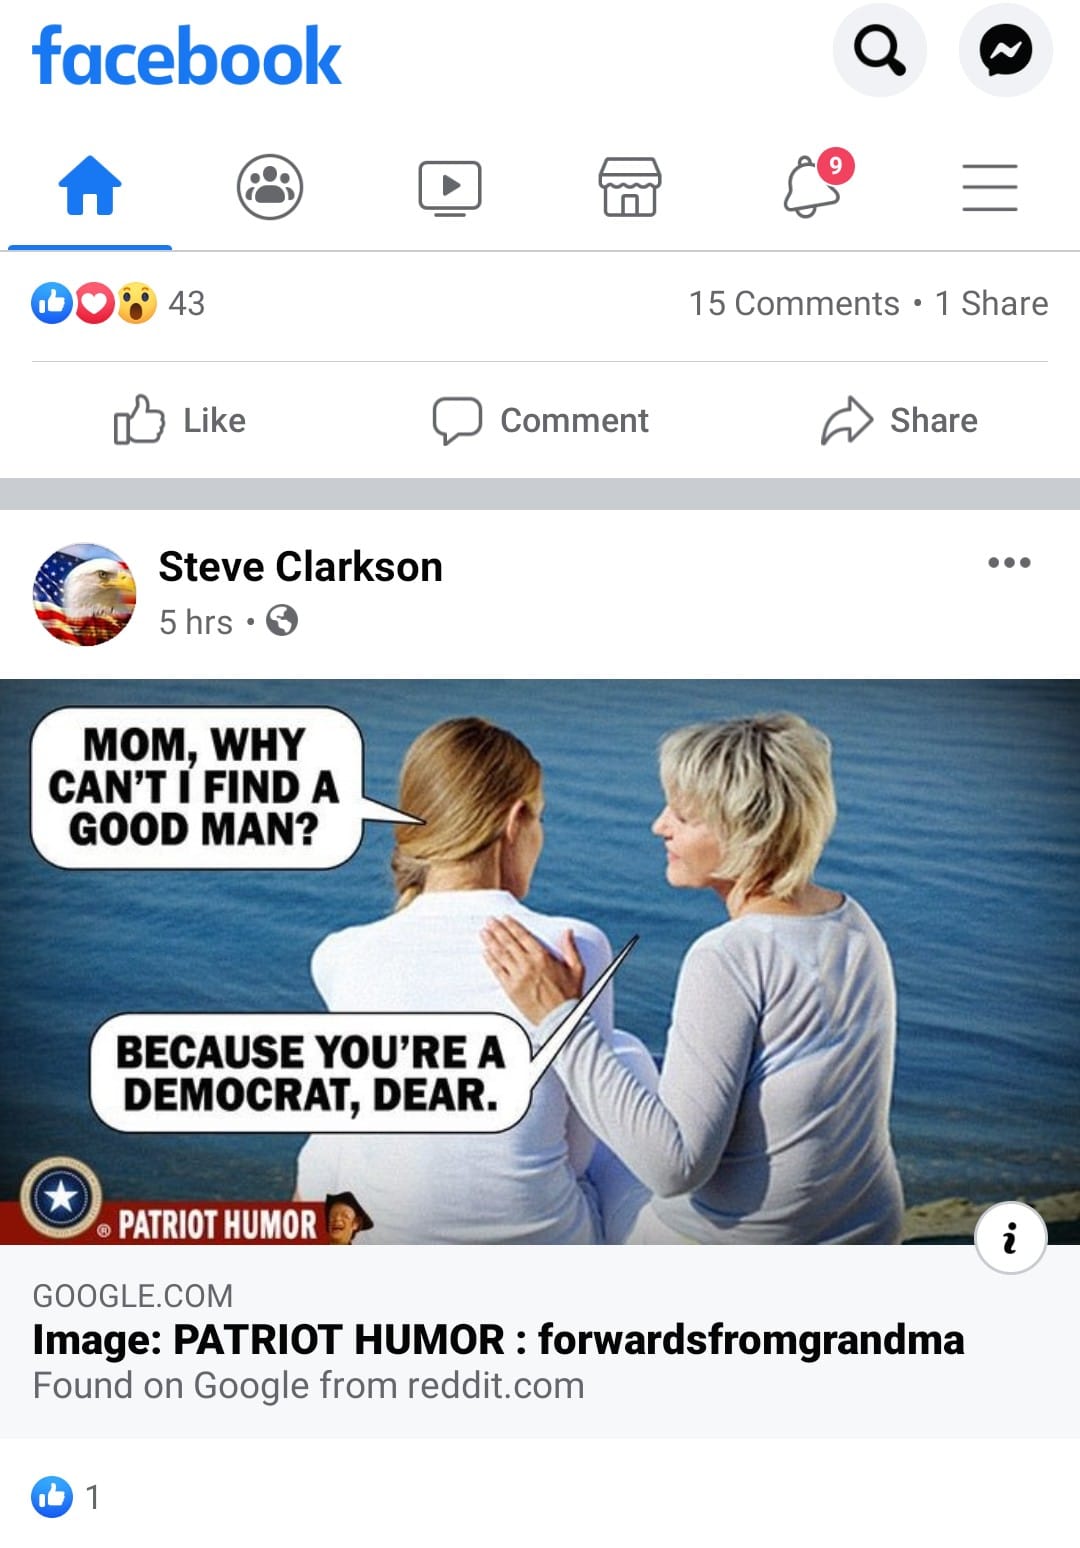 Political,  boomer memes Political,  text: facebook 43 02) Like Steve Clarkson 5 hrs •O MOM, WHY CAN'T I FIND A GOOD MAN? Comment BECAUSE YOU'RE A DEMOCRAT, DEAR. o @ PATRIOT HUMOR GOOGLE.COM Q 15 Comments • 1 Share Share i Image: PATRIOT HUMOR : forwardsfromgrandma Found on Google from reddit.com 